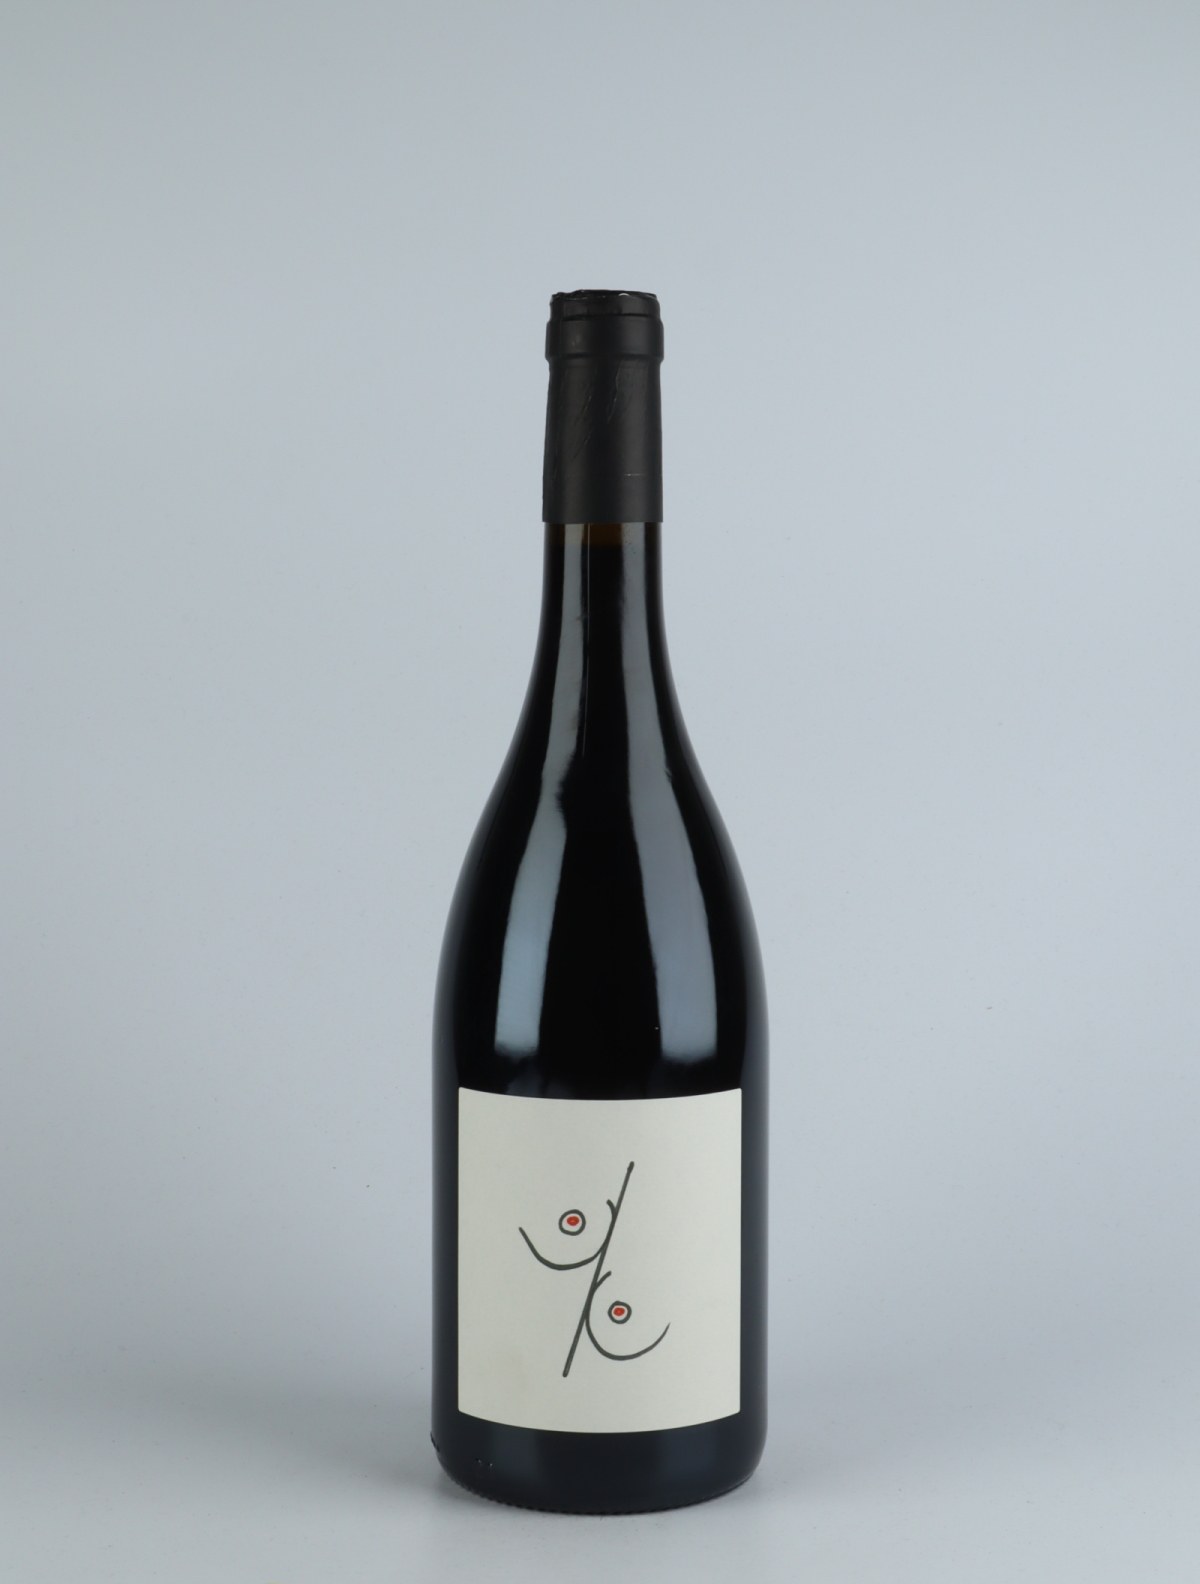 A bottle 2018 Sein pour Sein Red wine from Patrick Bouju, Auvergne in France